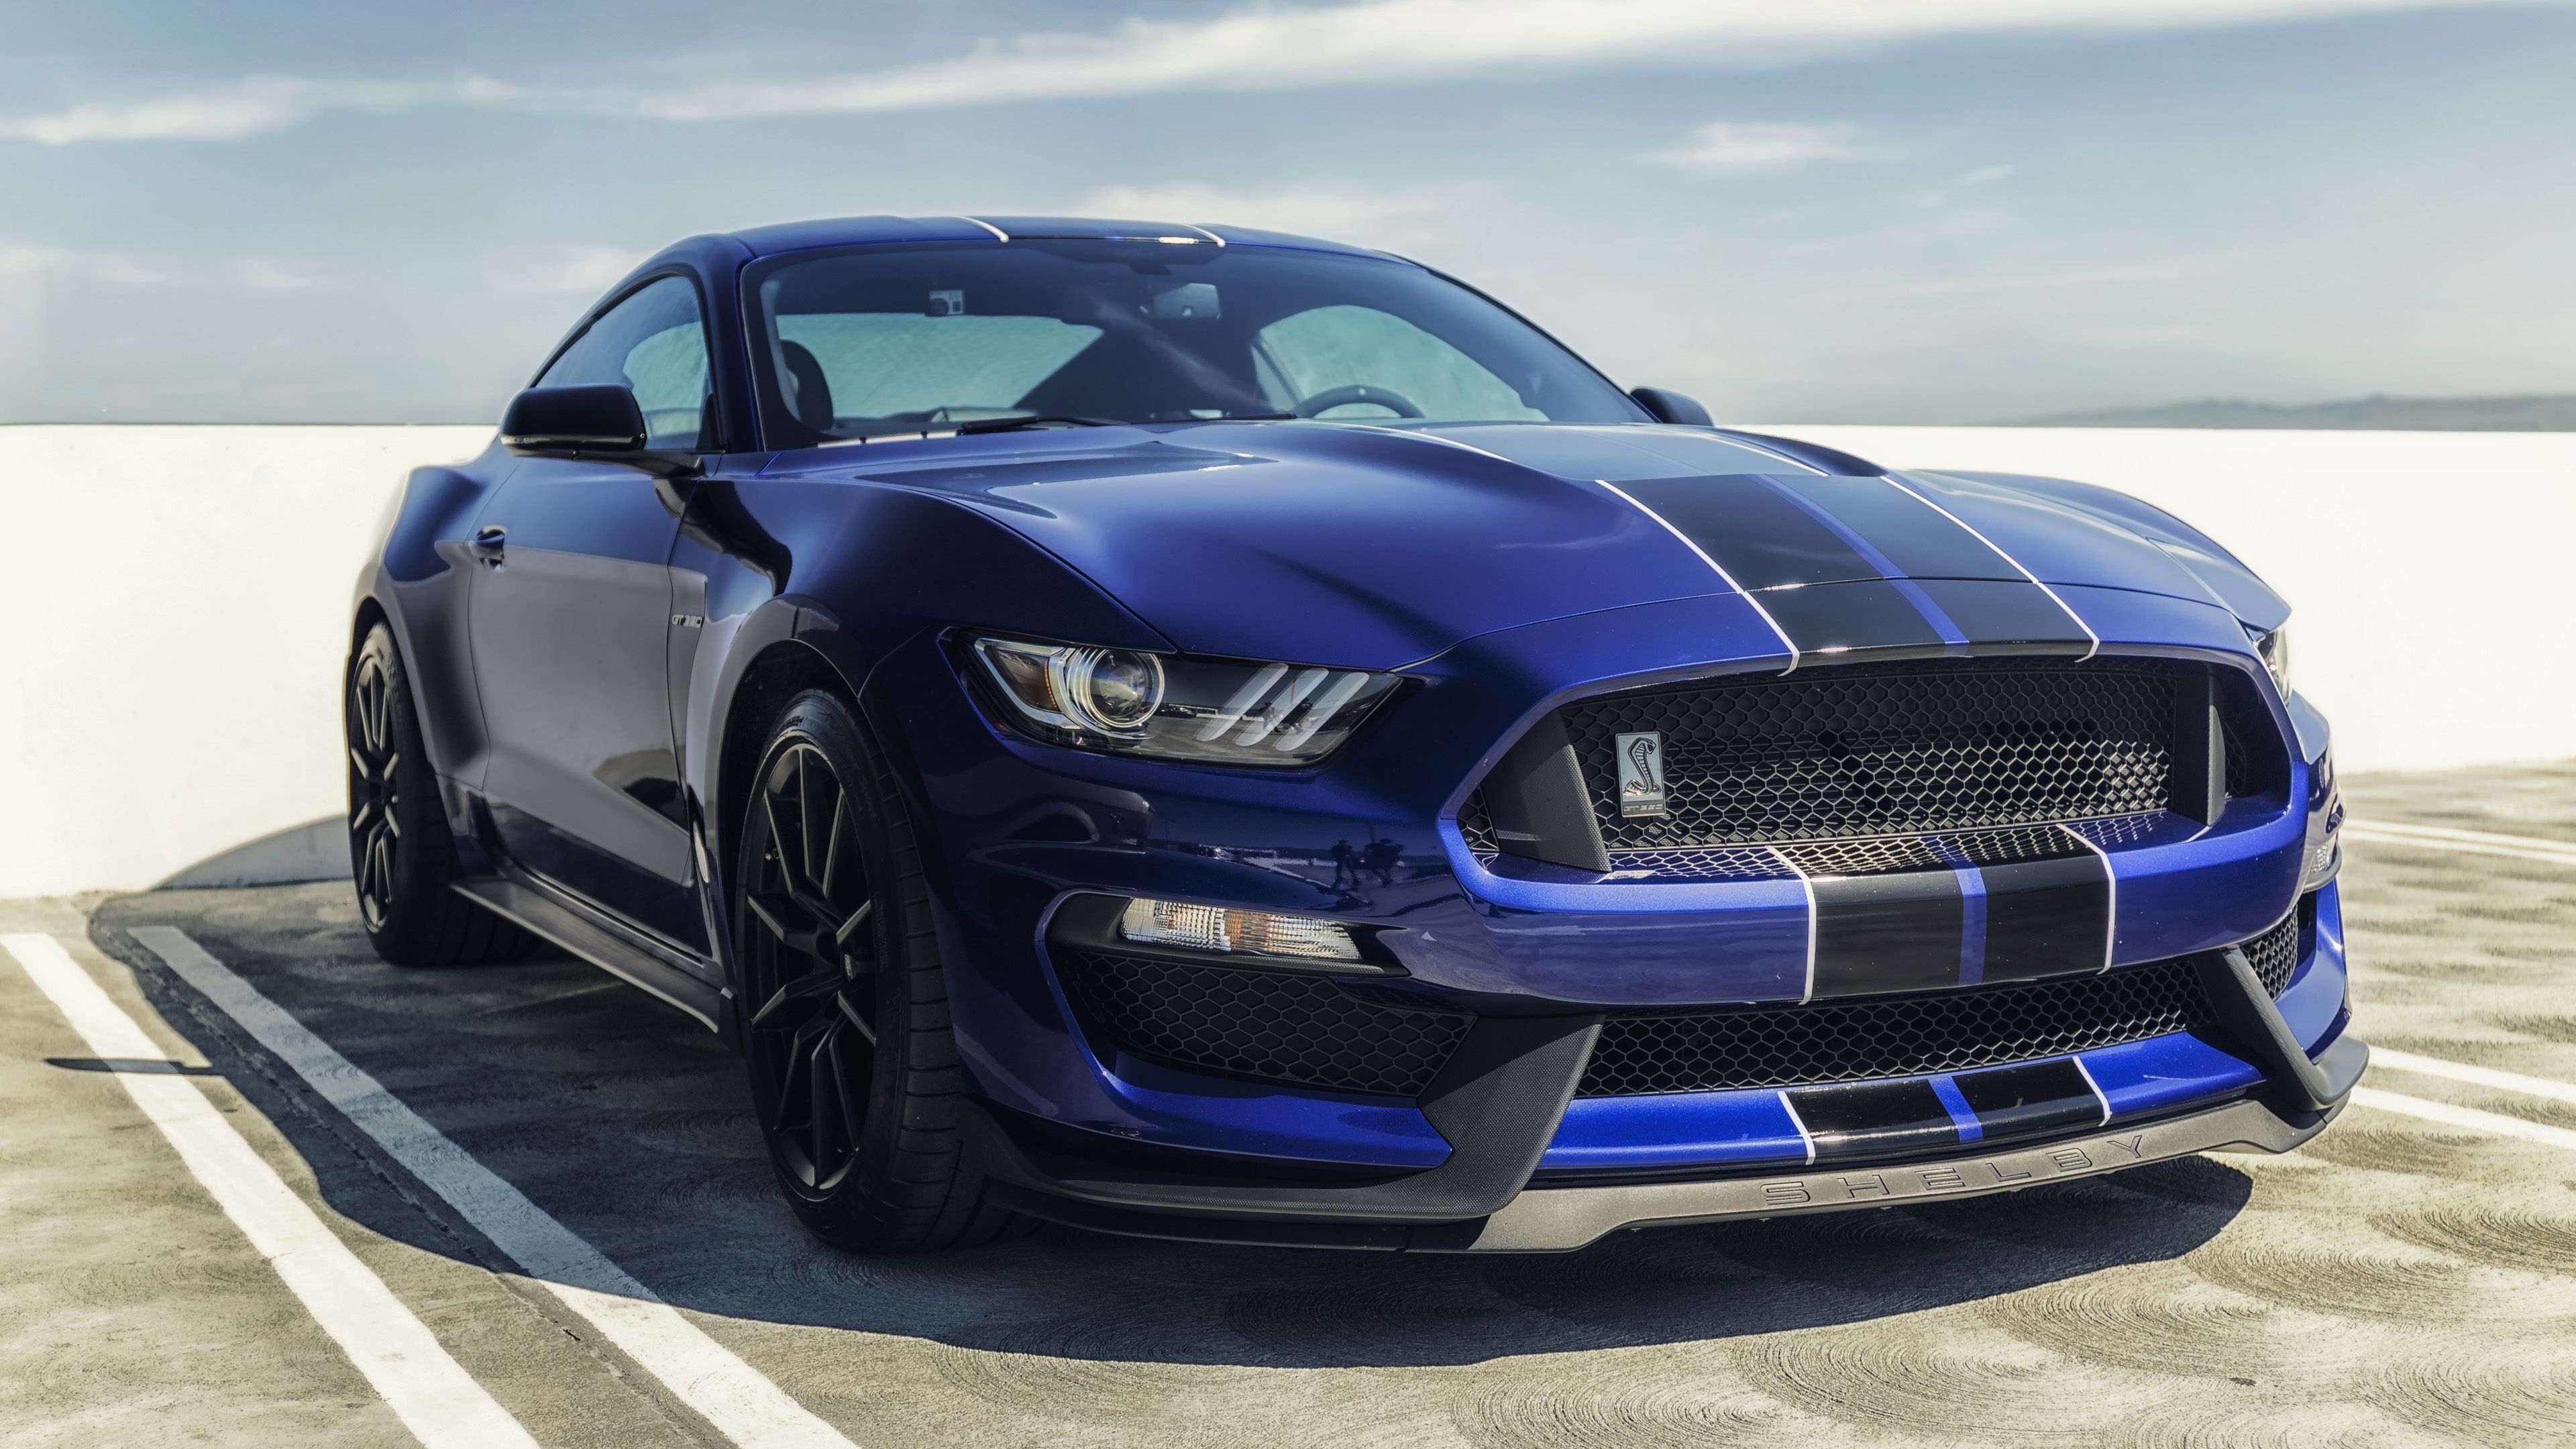 Ford Mustang Shelby Gt350 Blue Mustang Sports Cars Mustang Wallpaper 4k Download